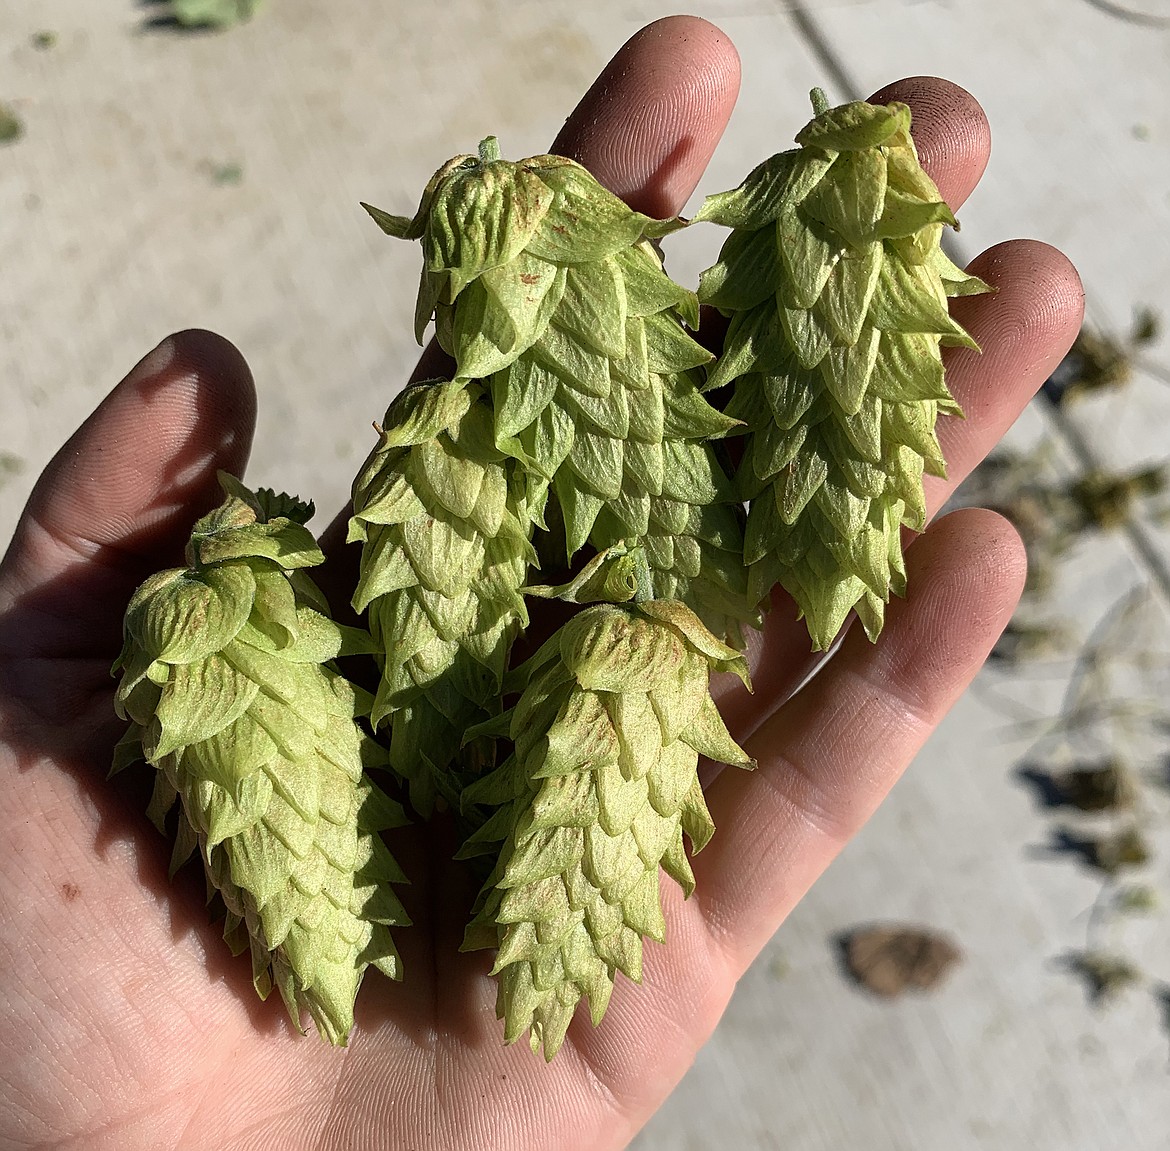 The cone-shaped flower of the hops plant is what is used to flavor beer. (photo provided)